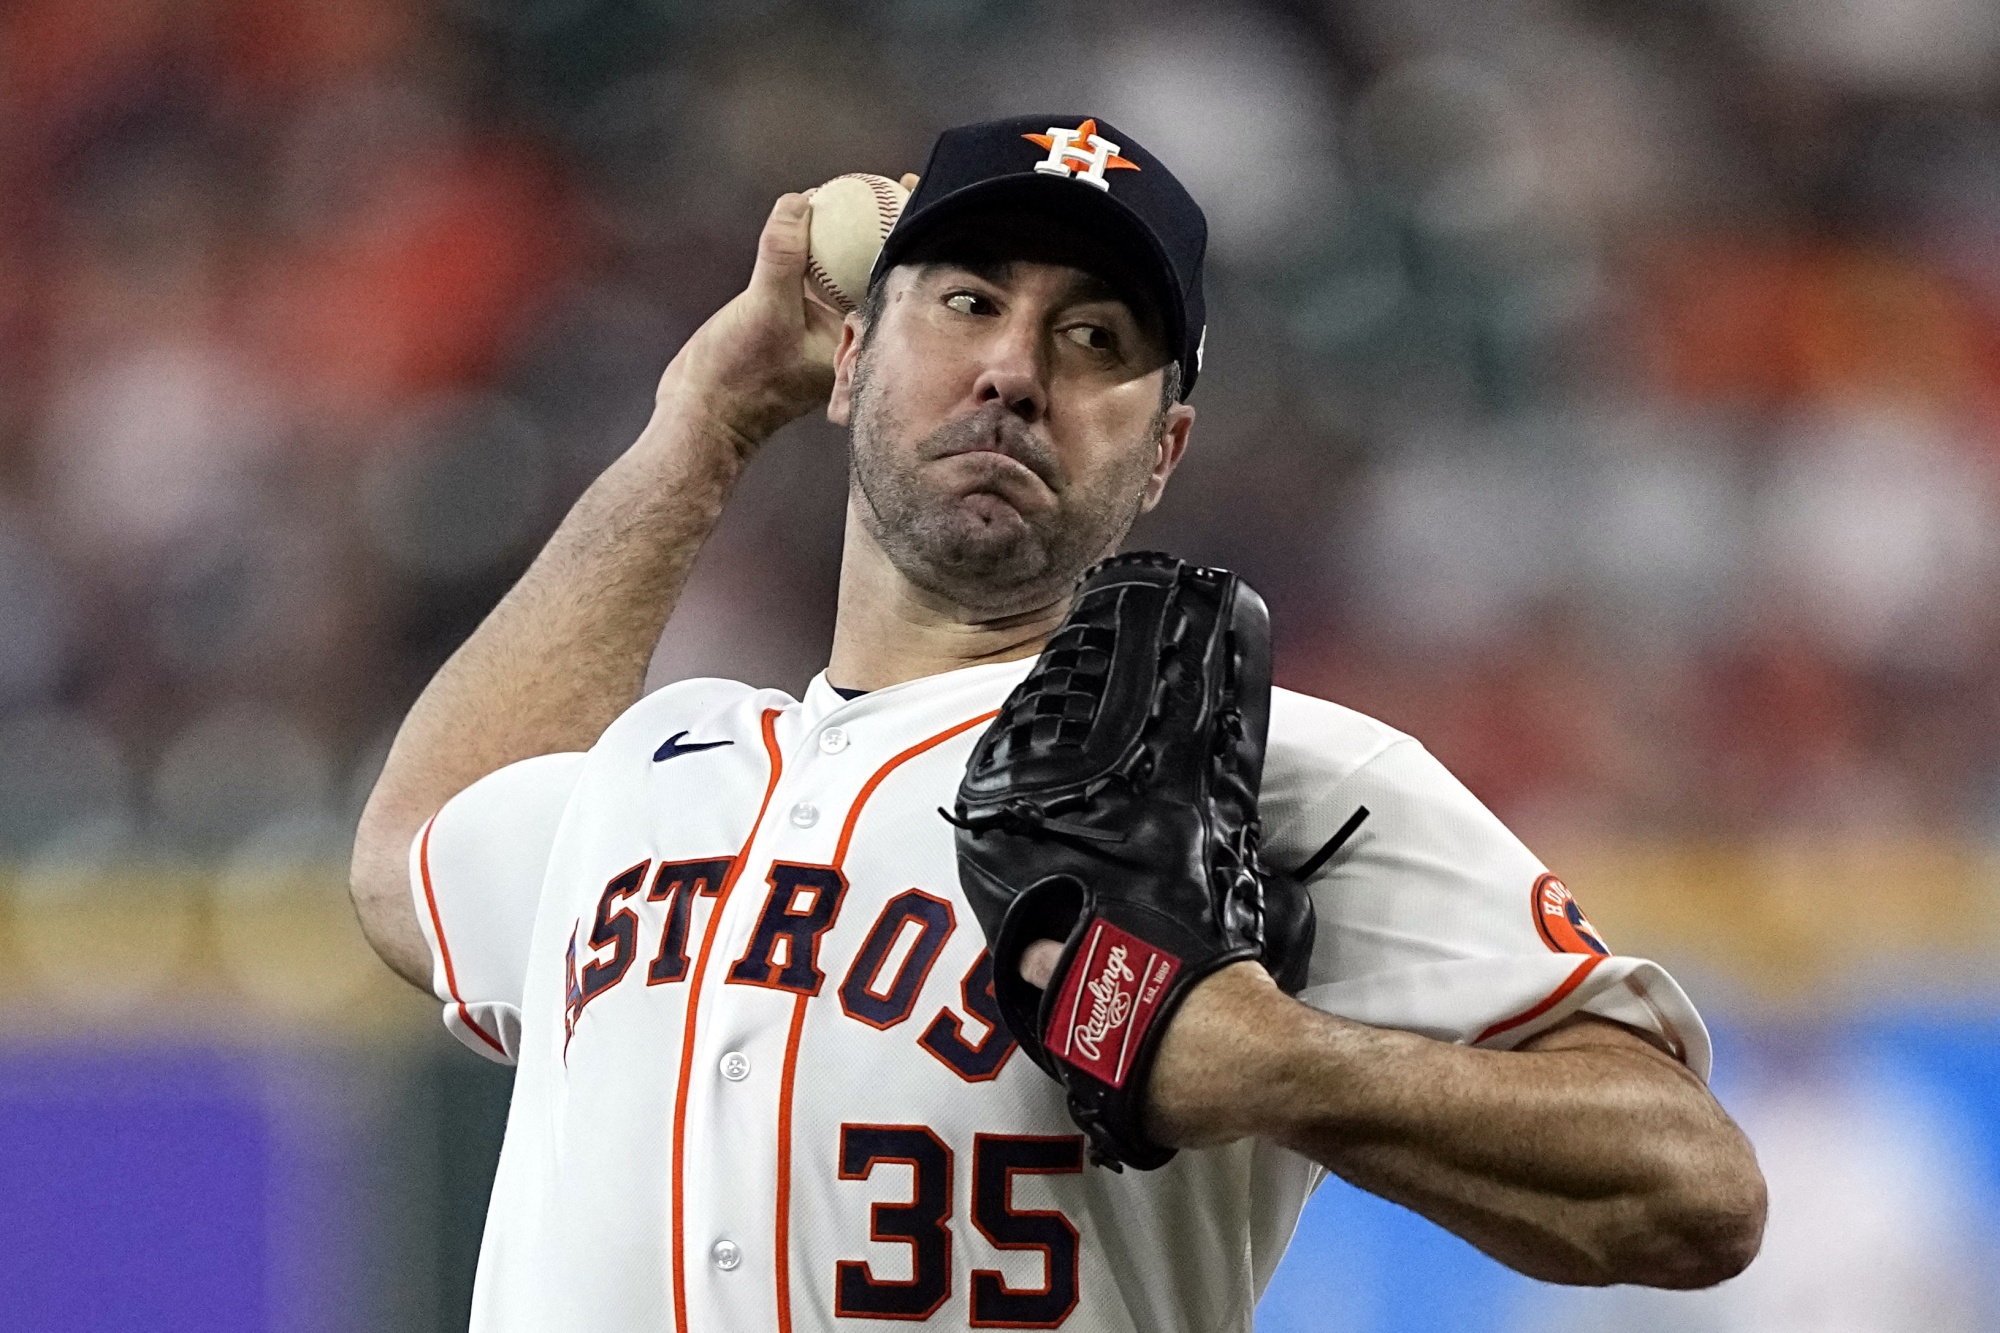 The Houston Astros' Justin Verlander Trade Is a Win-Now Playoff